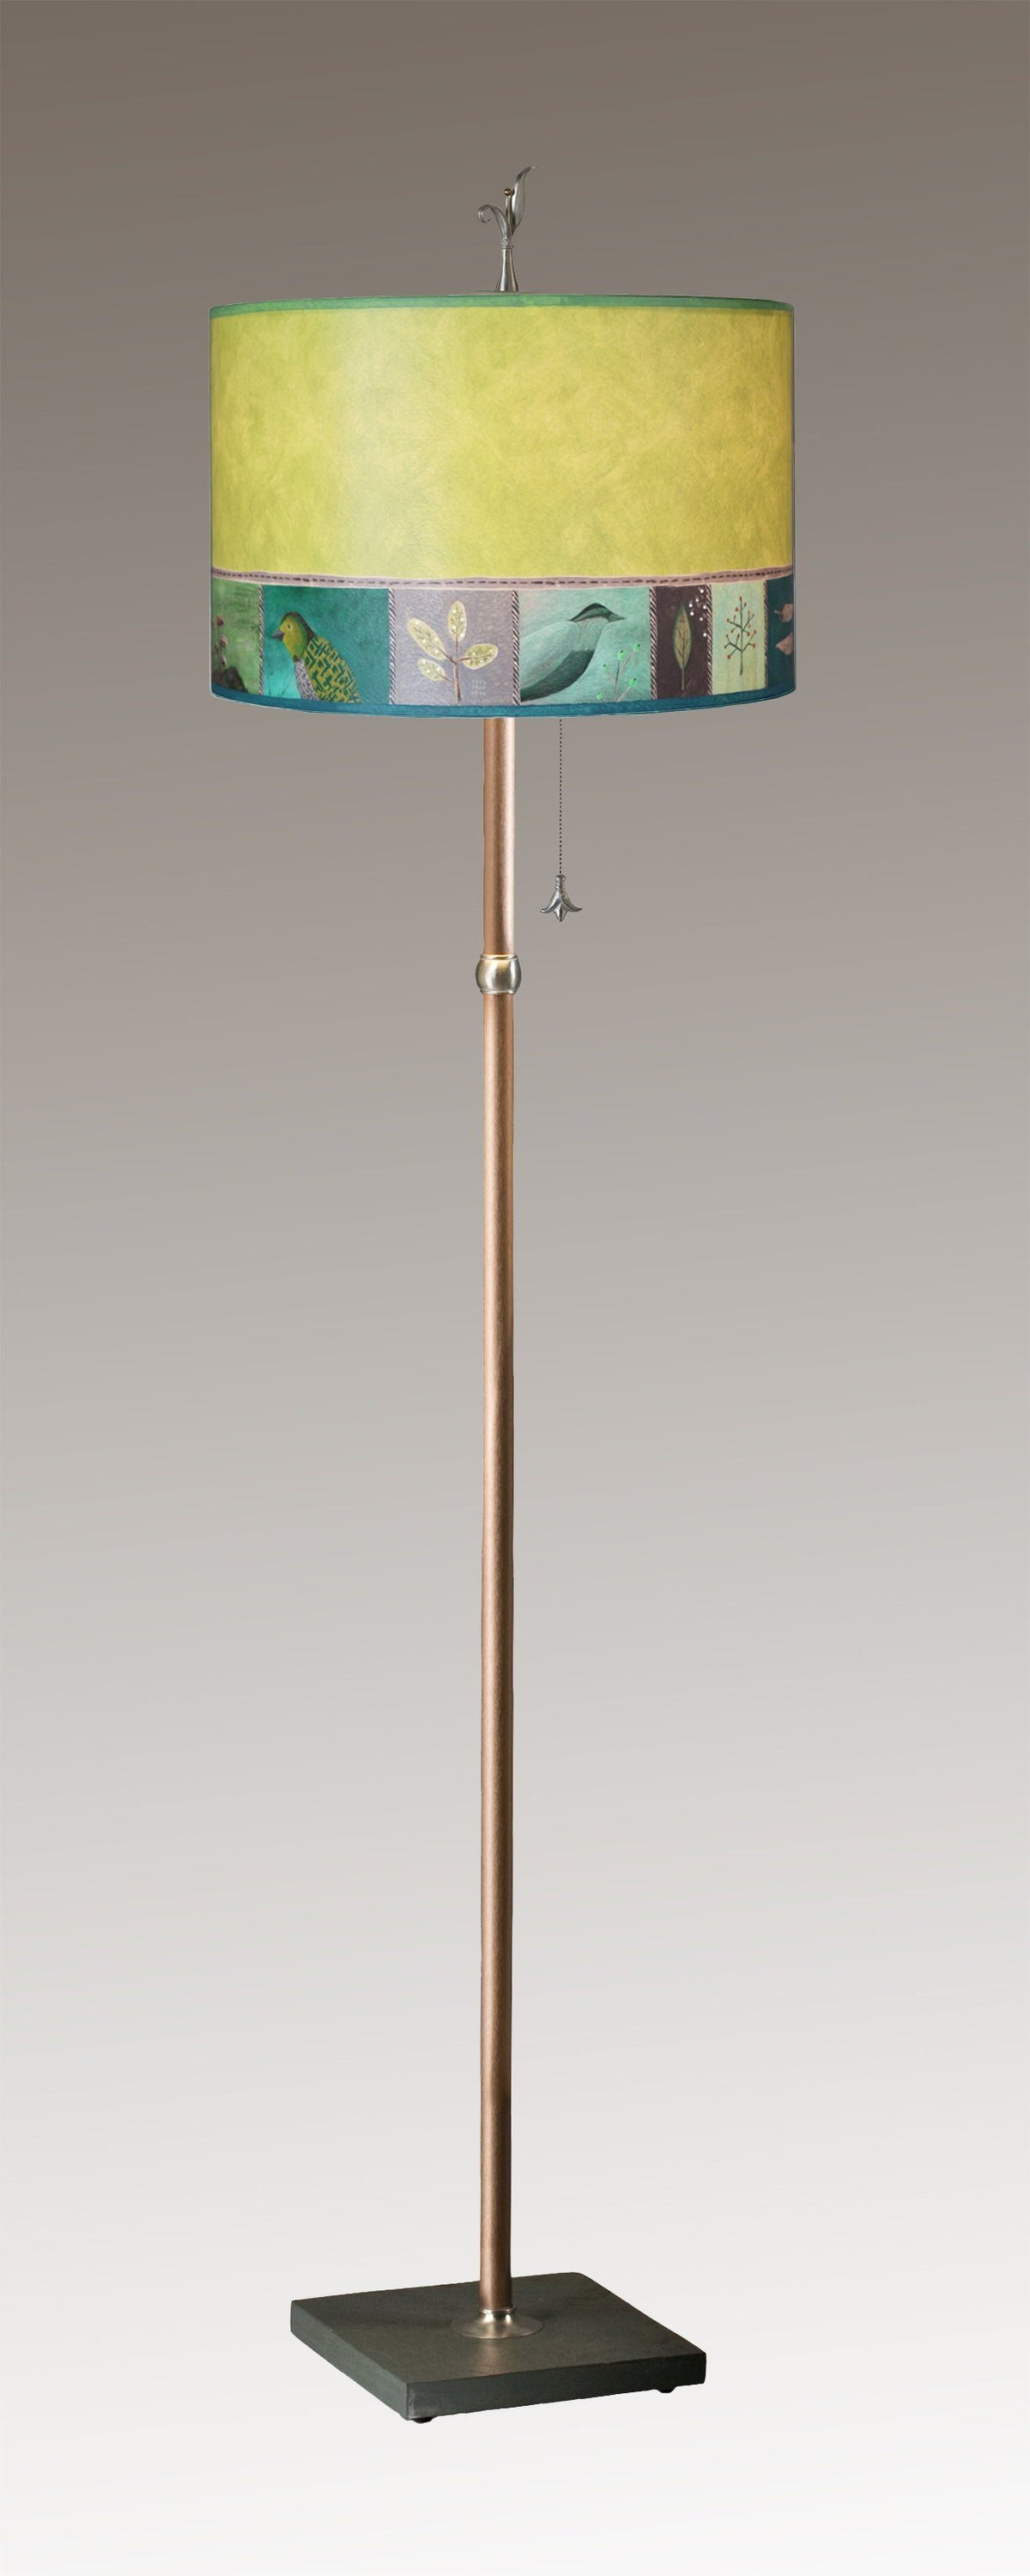 Janna Ugone &amp; Co Floor Lamps Copper Floor Lamp with Large Drum Shade in Woodland Trails in Leaf